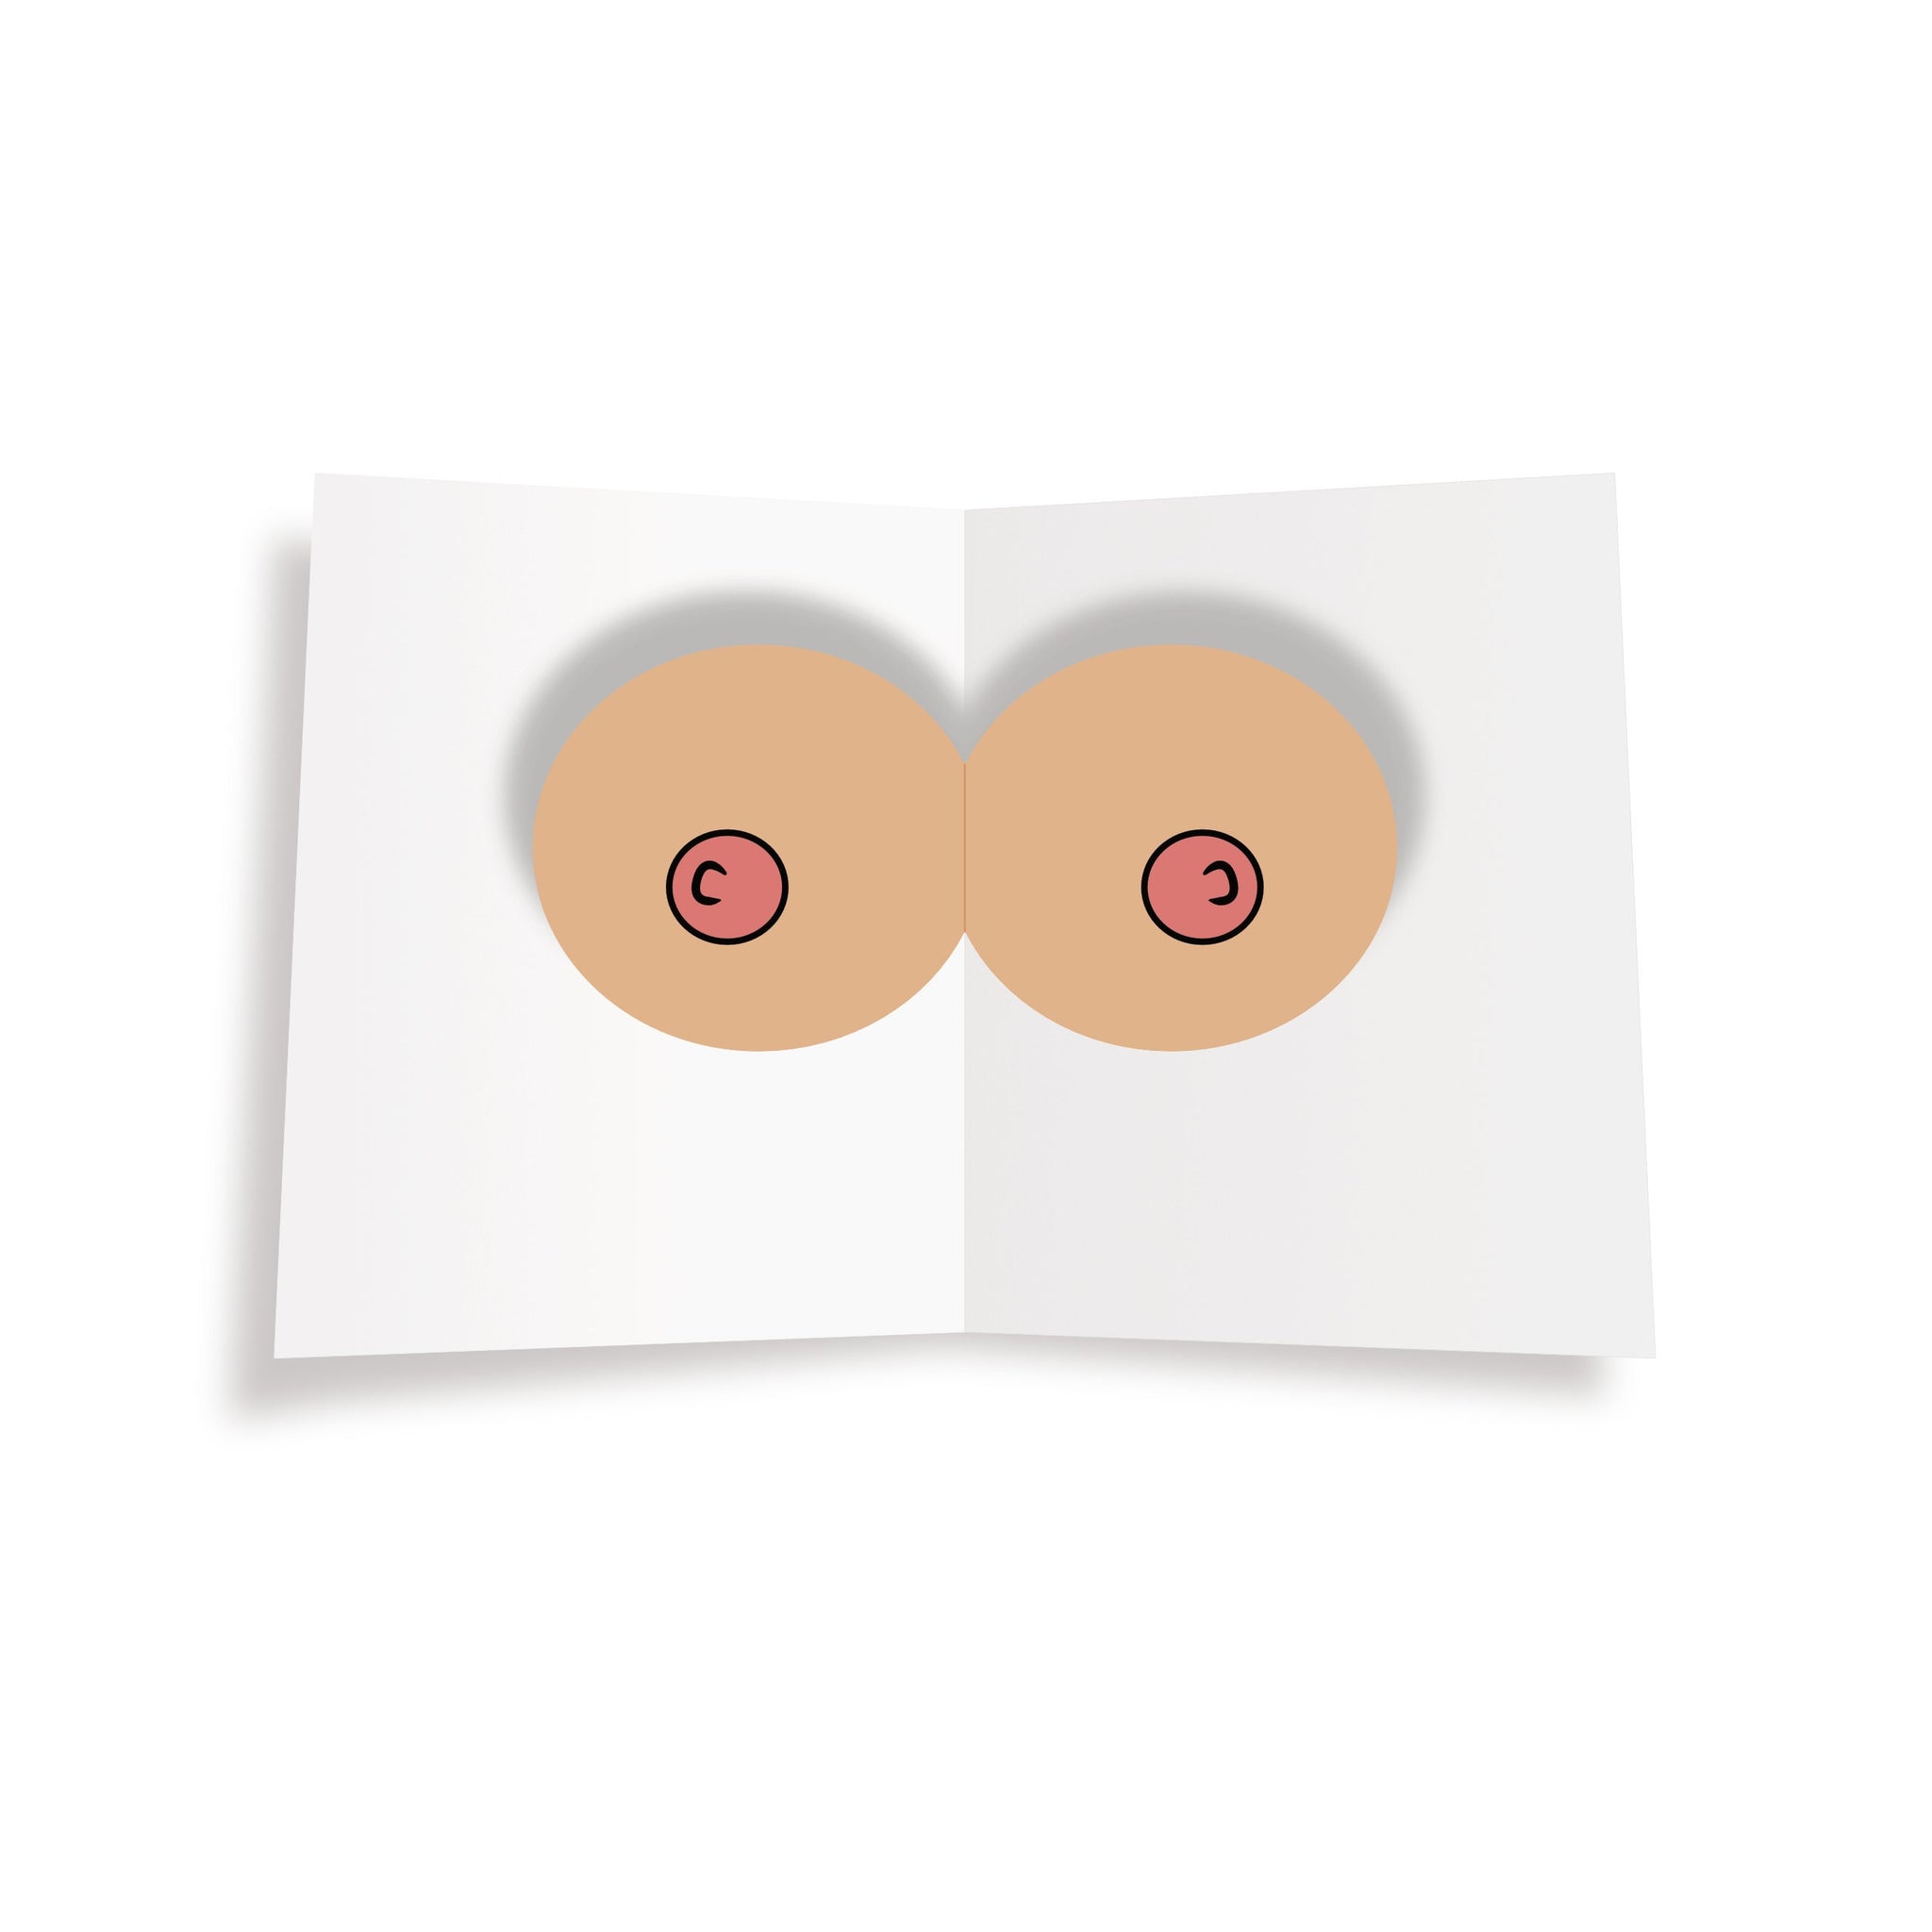 Merry Titsmas- Pop Up Boob Card - Dicks By Mail - Anonymously mail